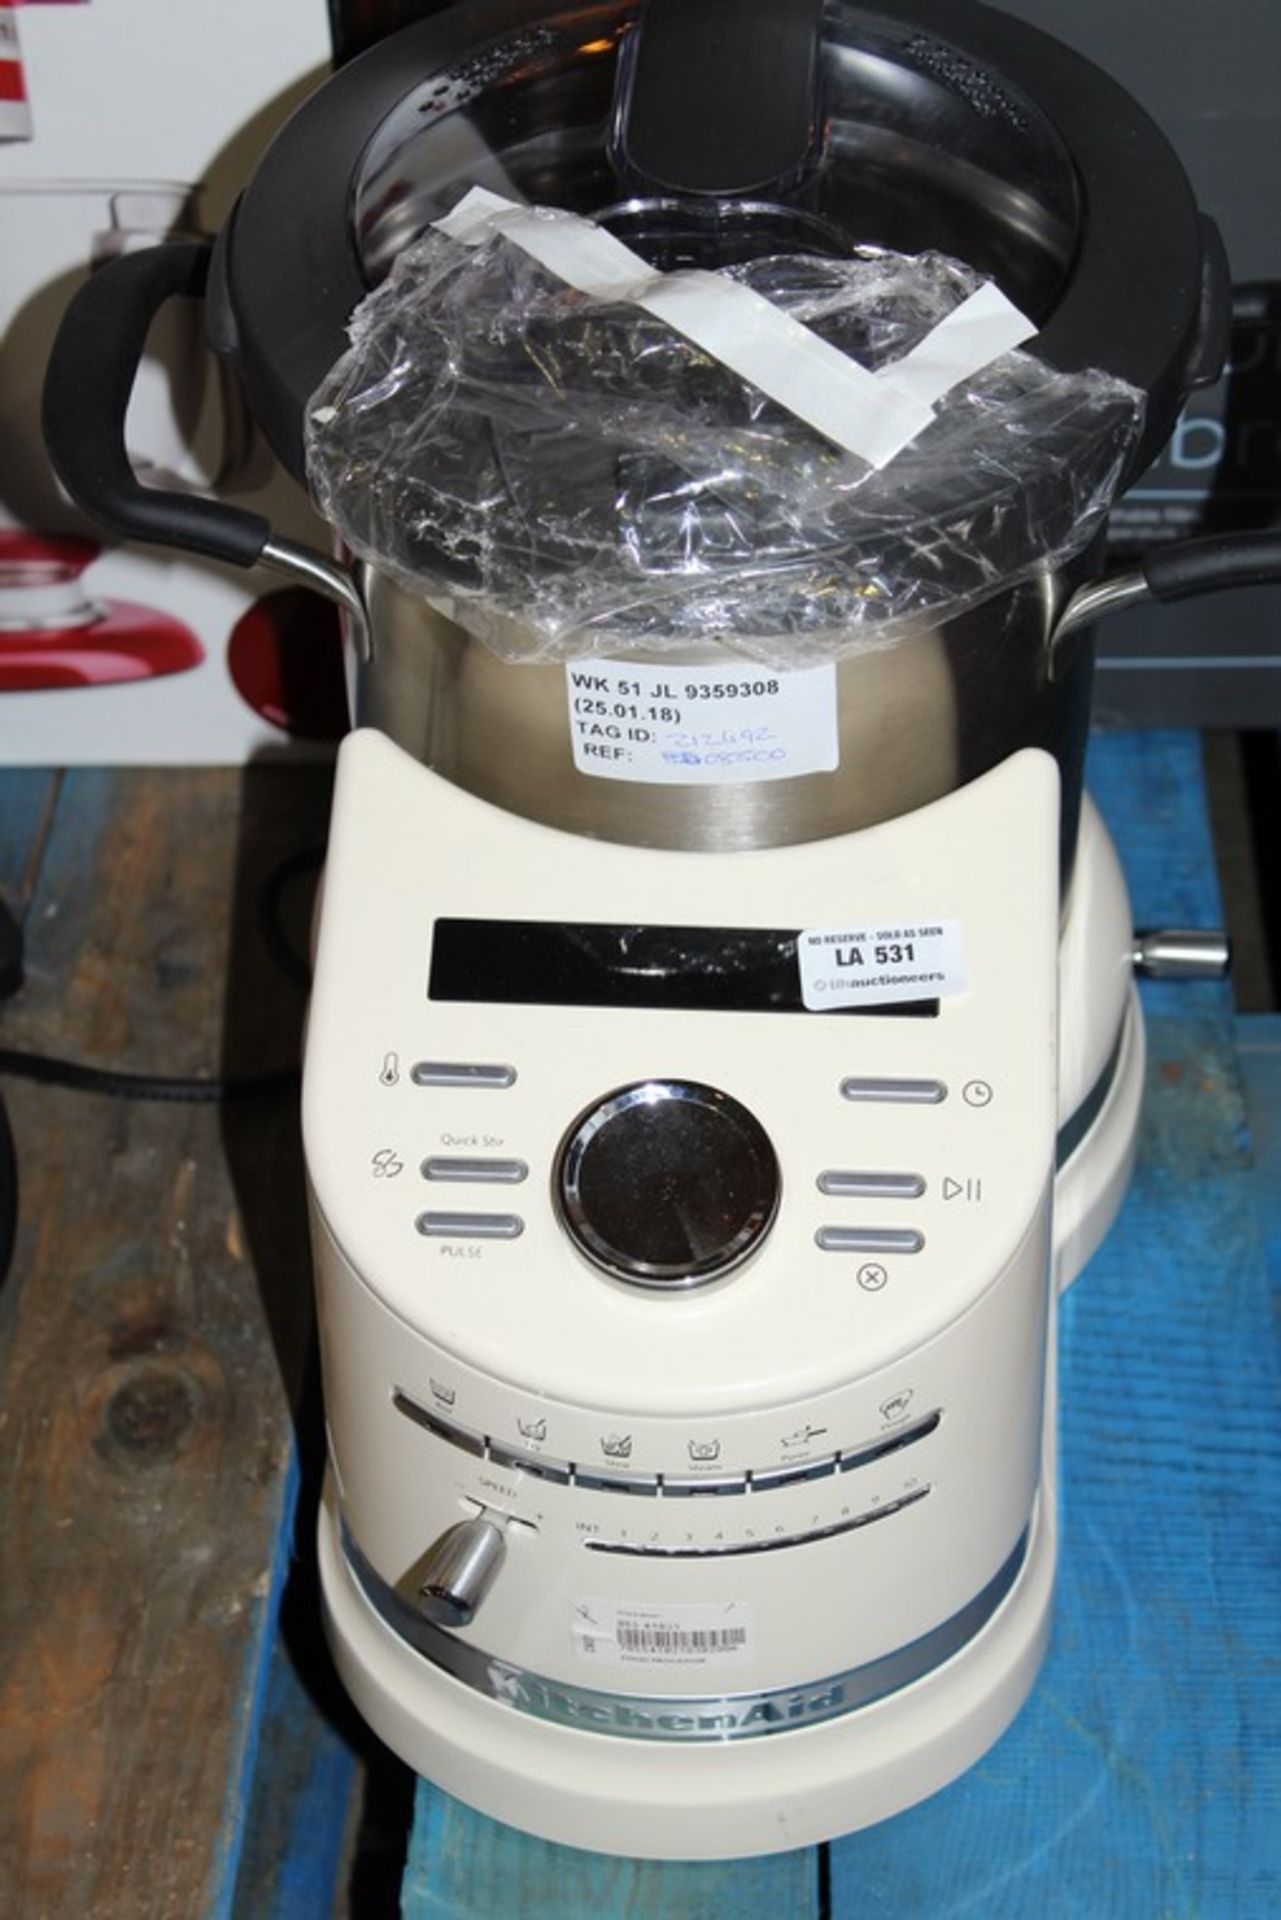 1 x KITCHEN AID ARTISAN FOOD PROCESSOR IN CREAM RRP £850 (25.01.18) (212492) *PLEASE NOTE THAT THE